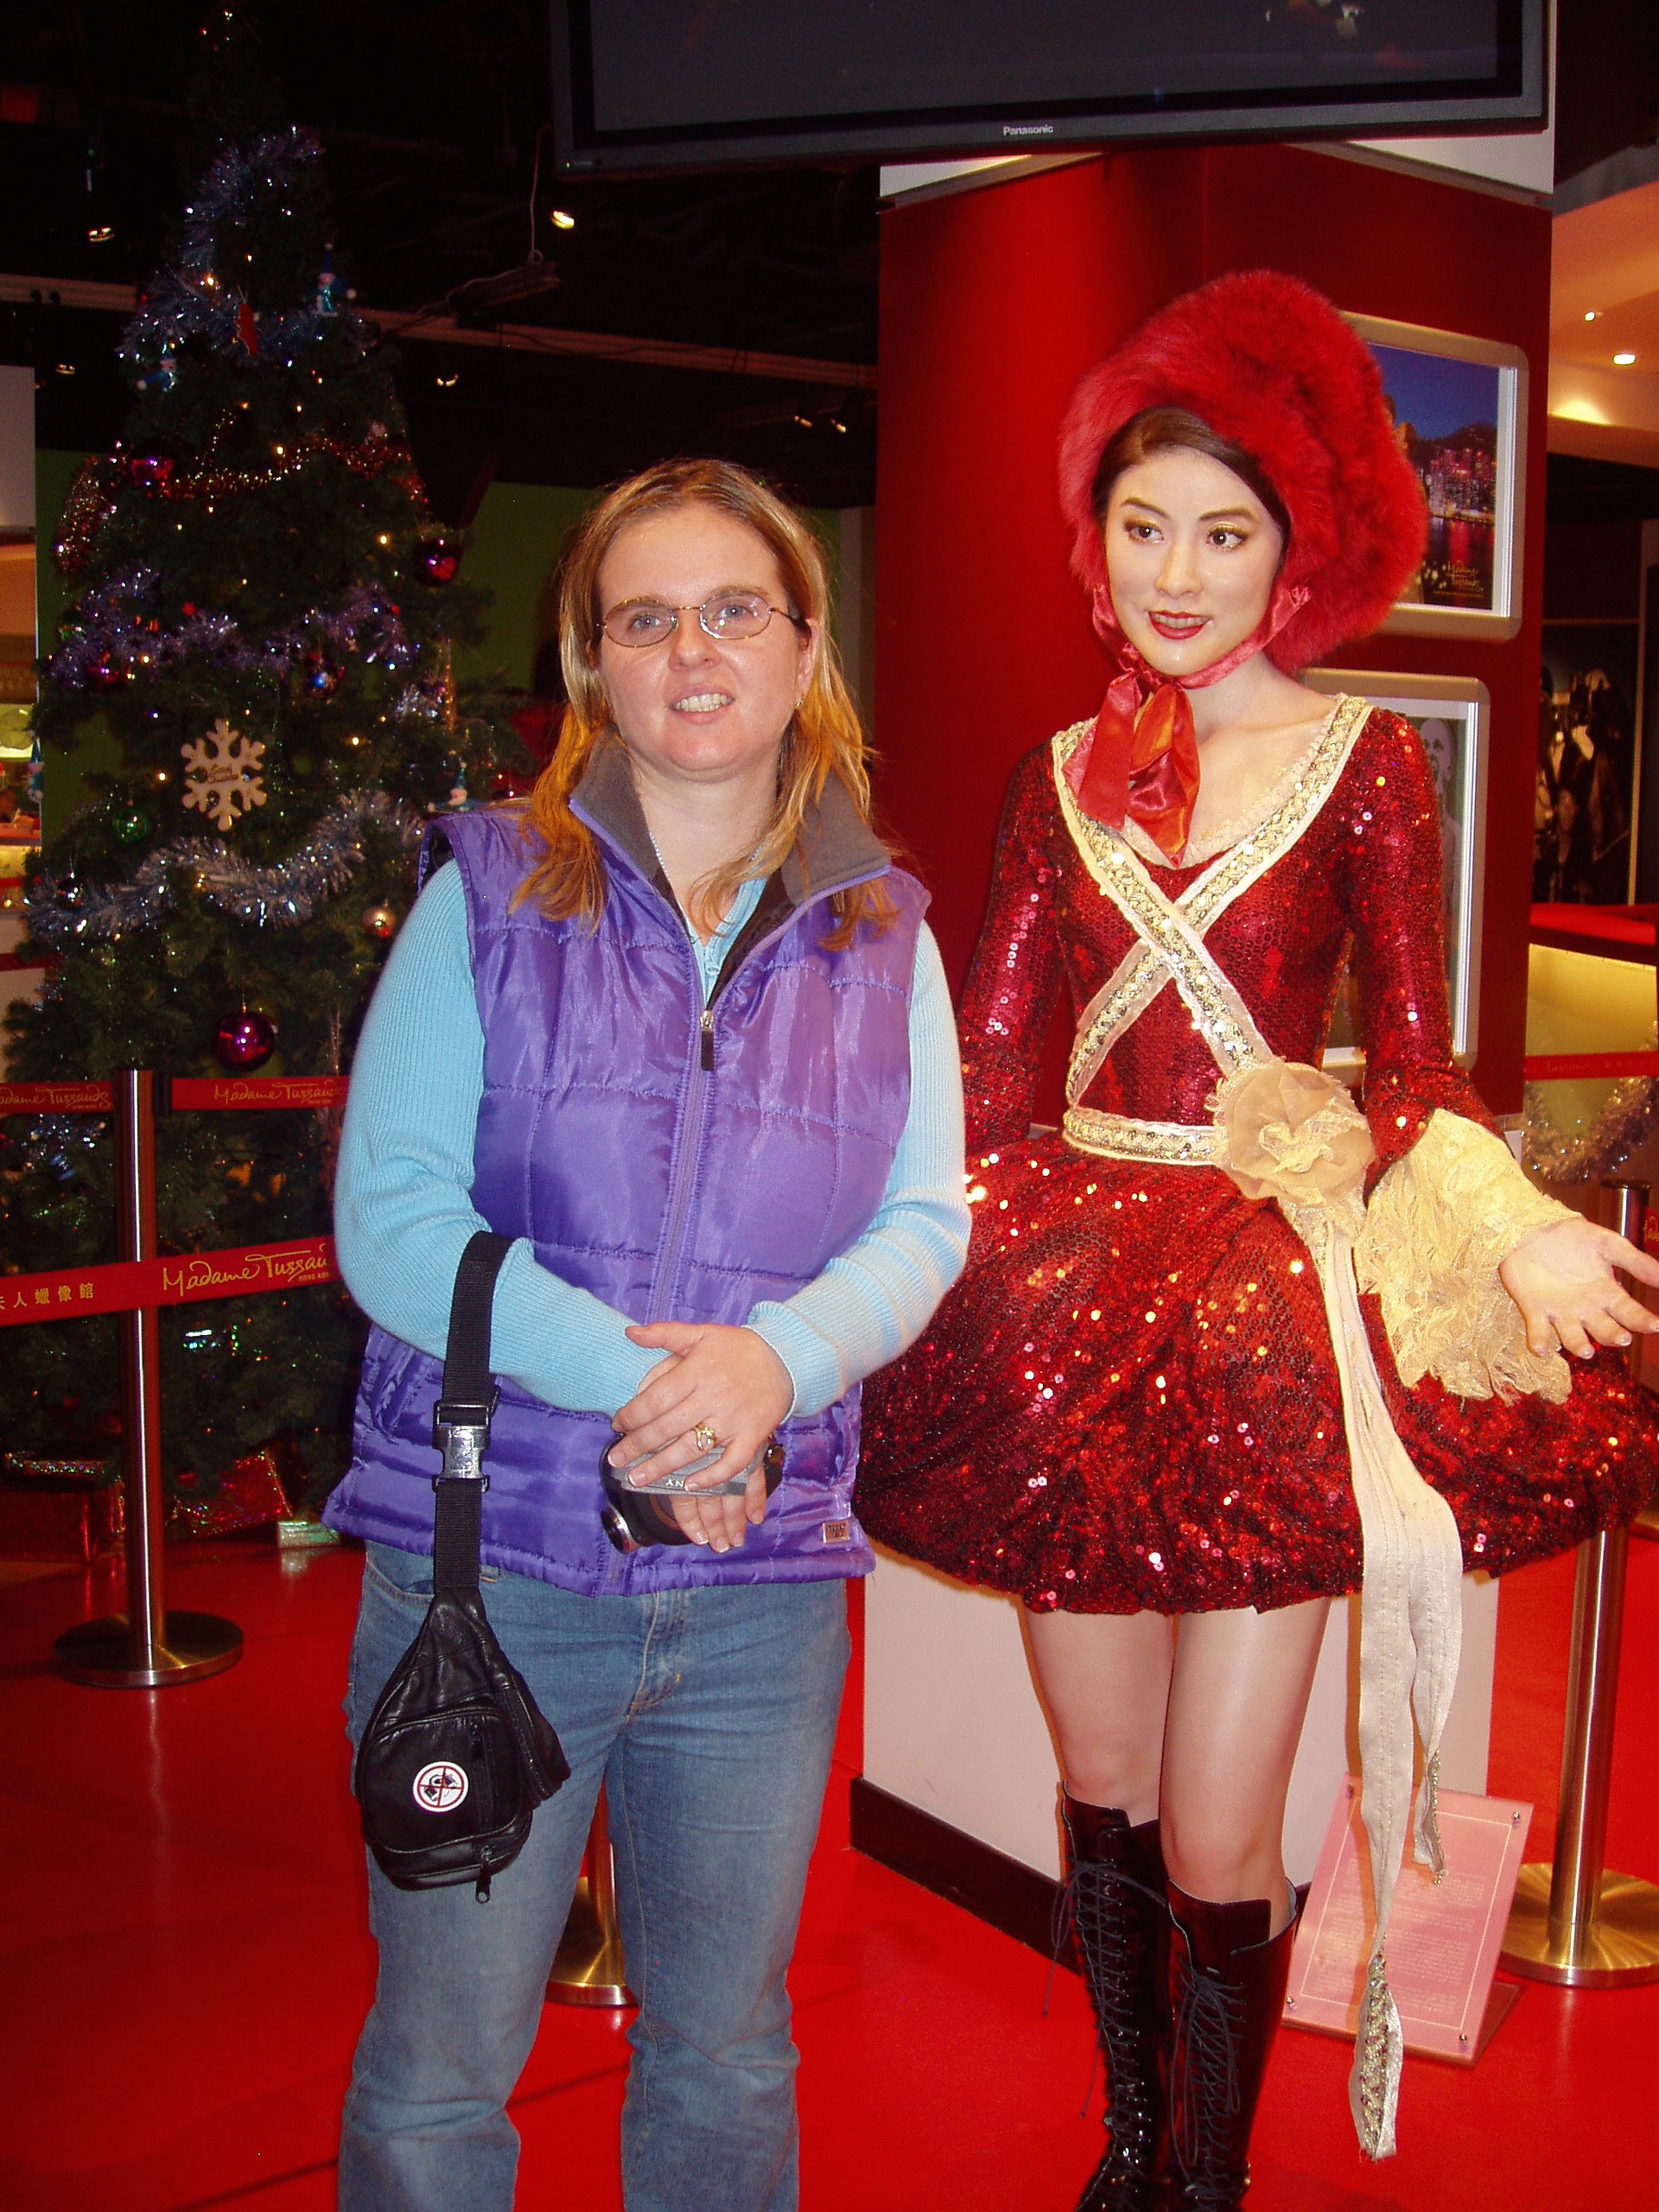 a wax figurine at the entrance of a casino in Macao; December 2006